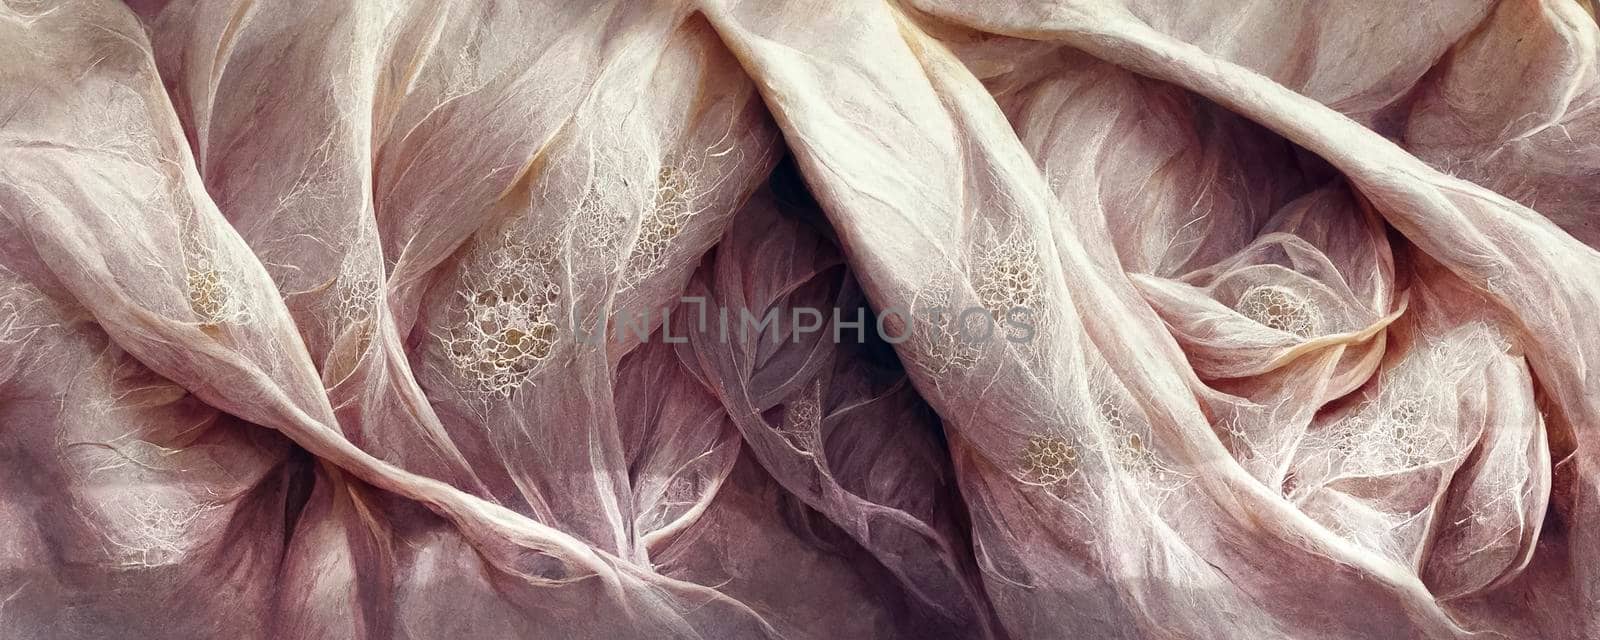 Silk wavy composition. Abstract texture of silk chiffon fabric in champagne color. Silk fabric mockup as artistic layout background. by jbruiz78